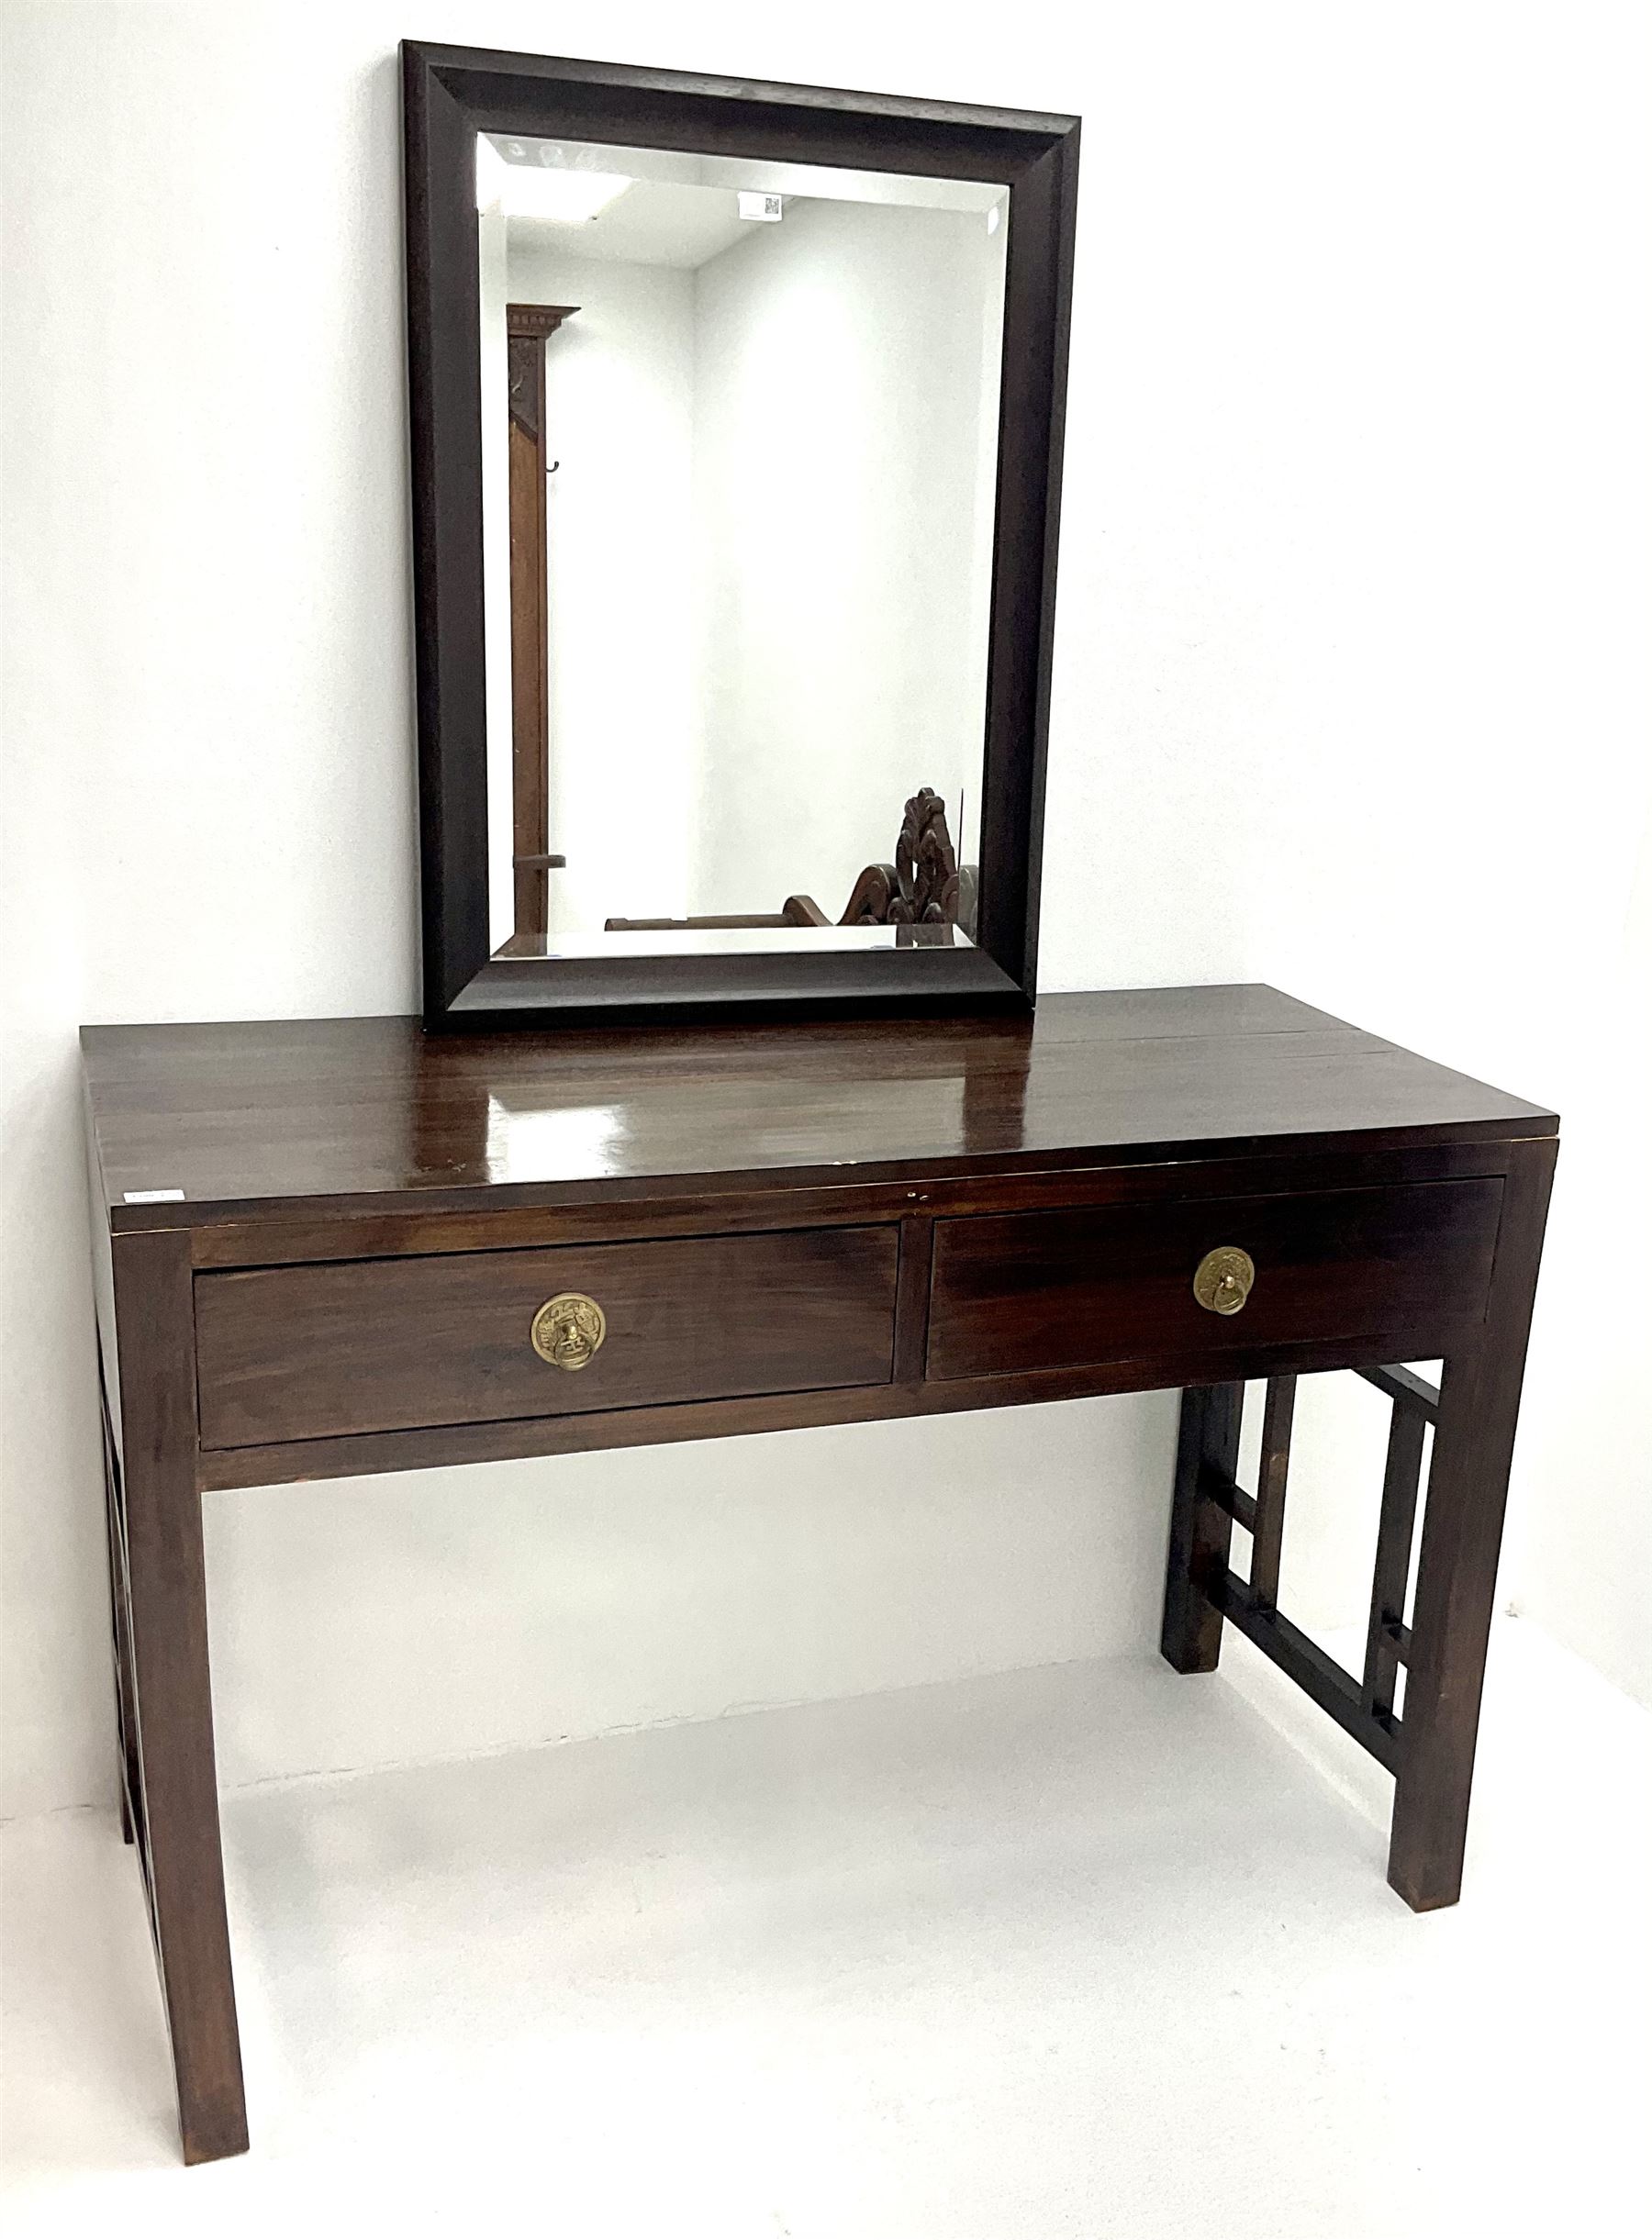 Hardwood console table - Image 2 of 2